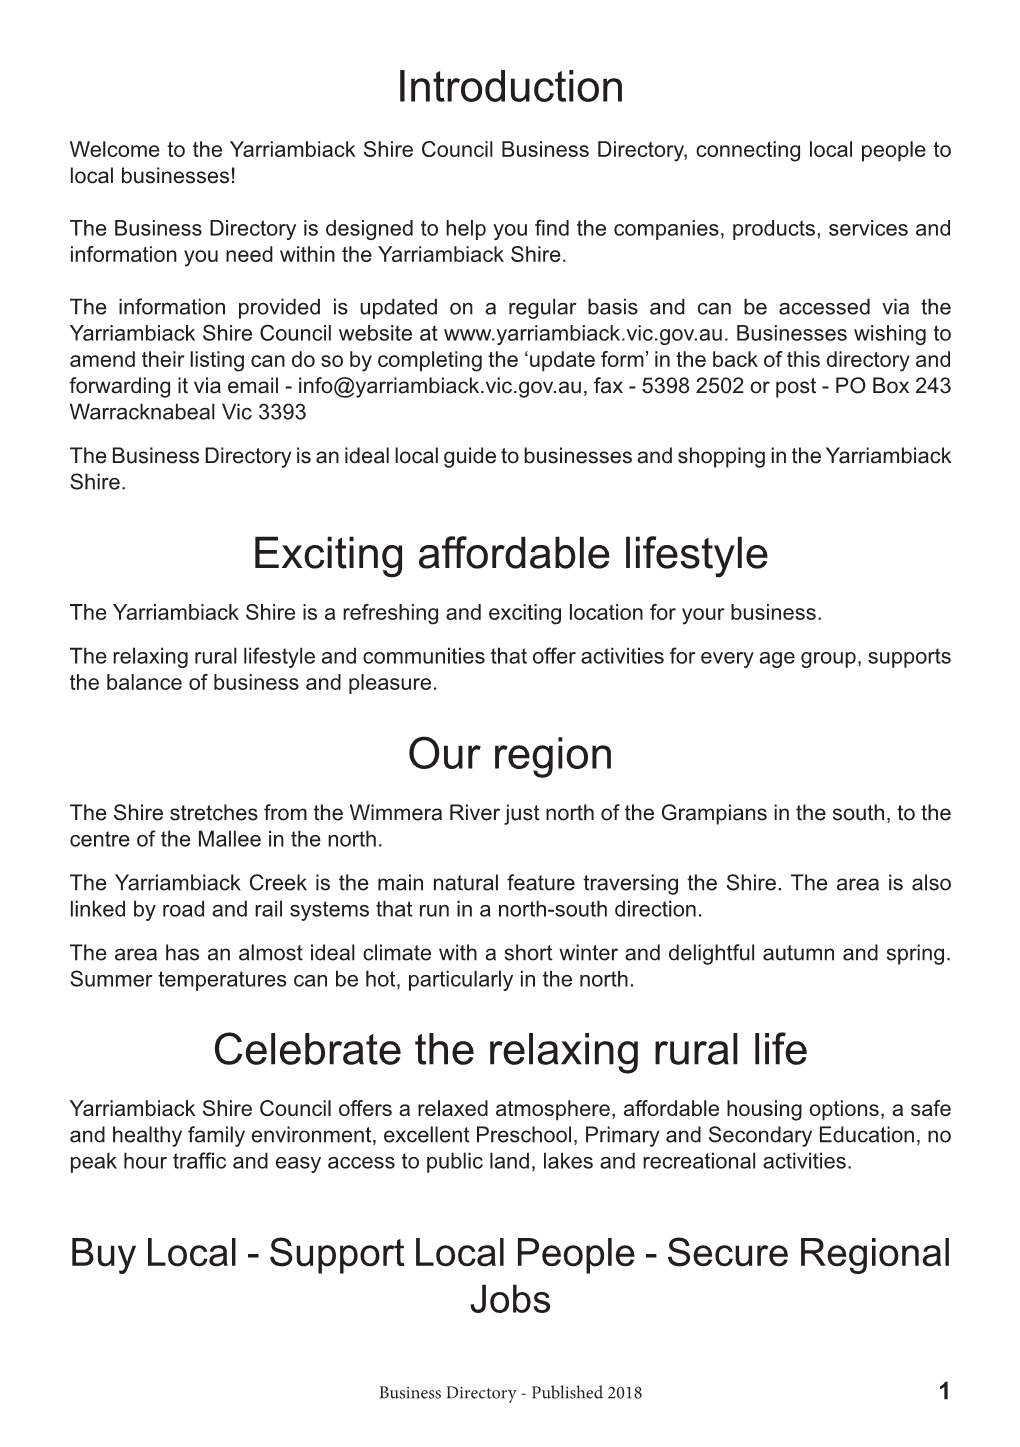 Introduction Exciting Affordable Lifestyle Our Region Celebrate the Relaxing Rural Life